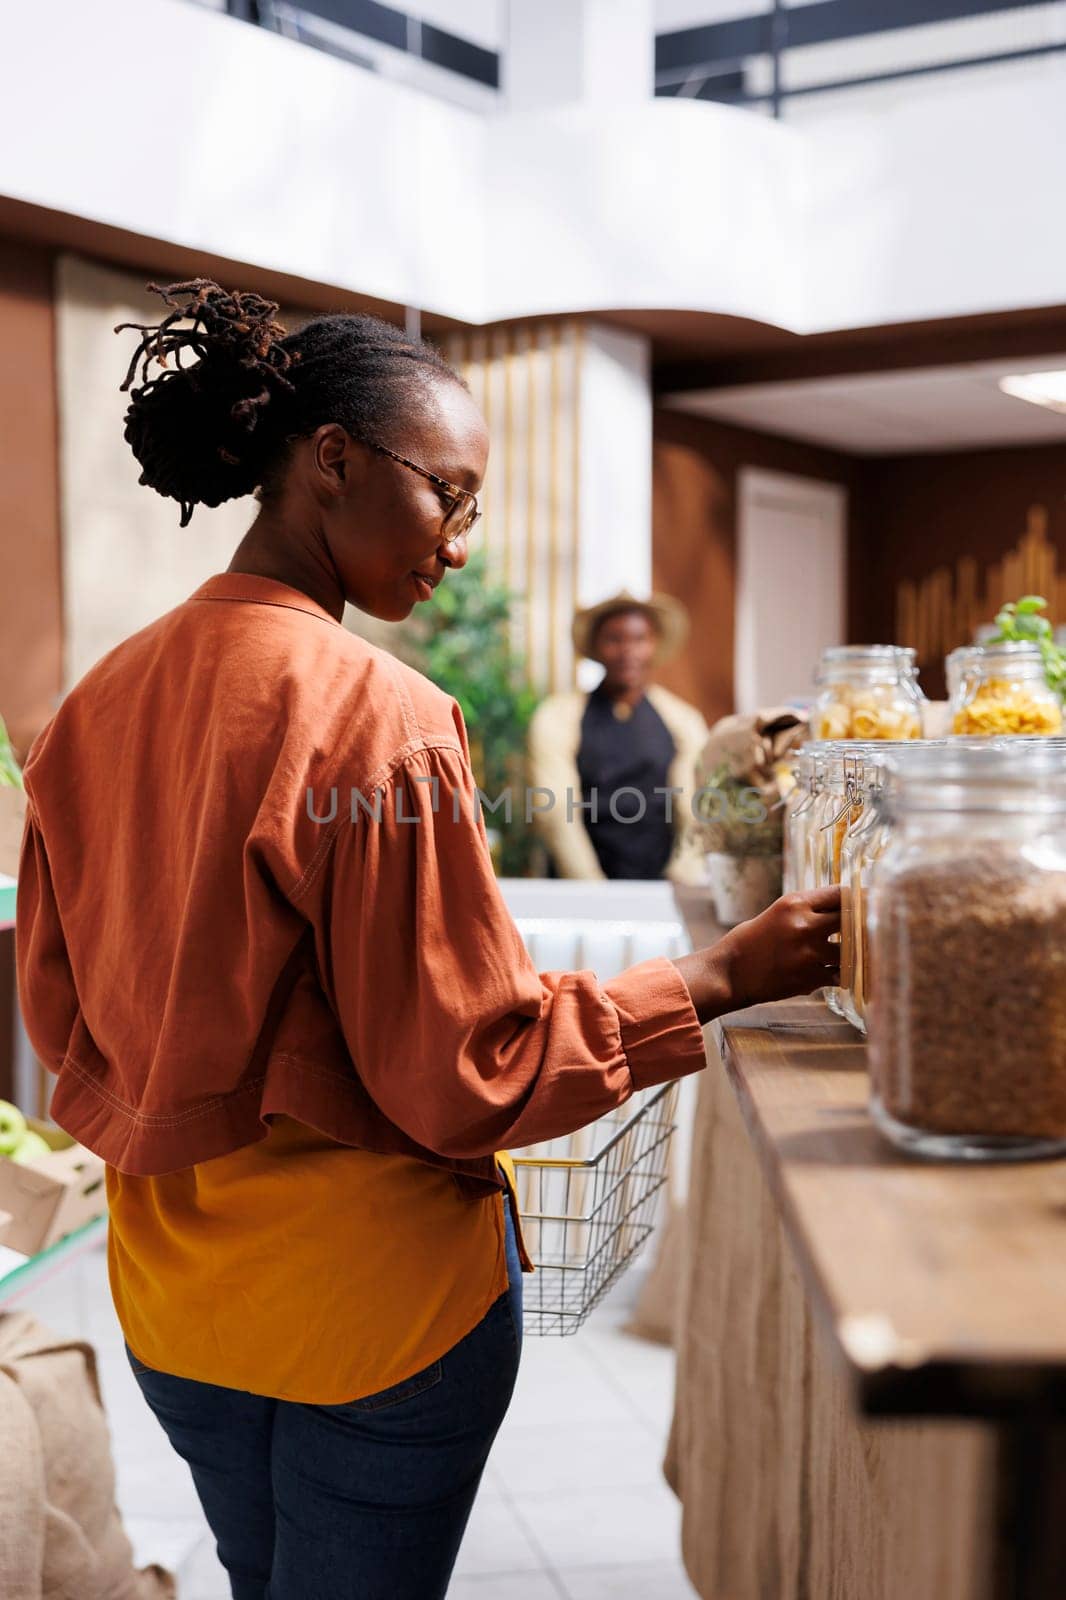 African American client shops for fresh, locally grown produce in a grocery store. They verify organic options and explore eco friendly packaging. The store offers sustainable, zero waste choices for a healthy, conscious shopping experience.